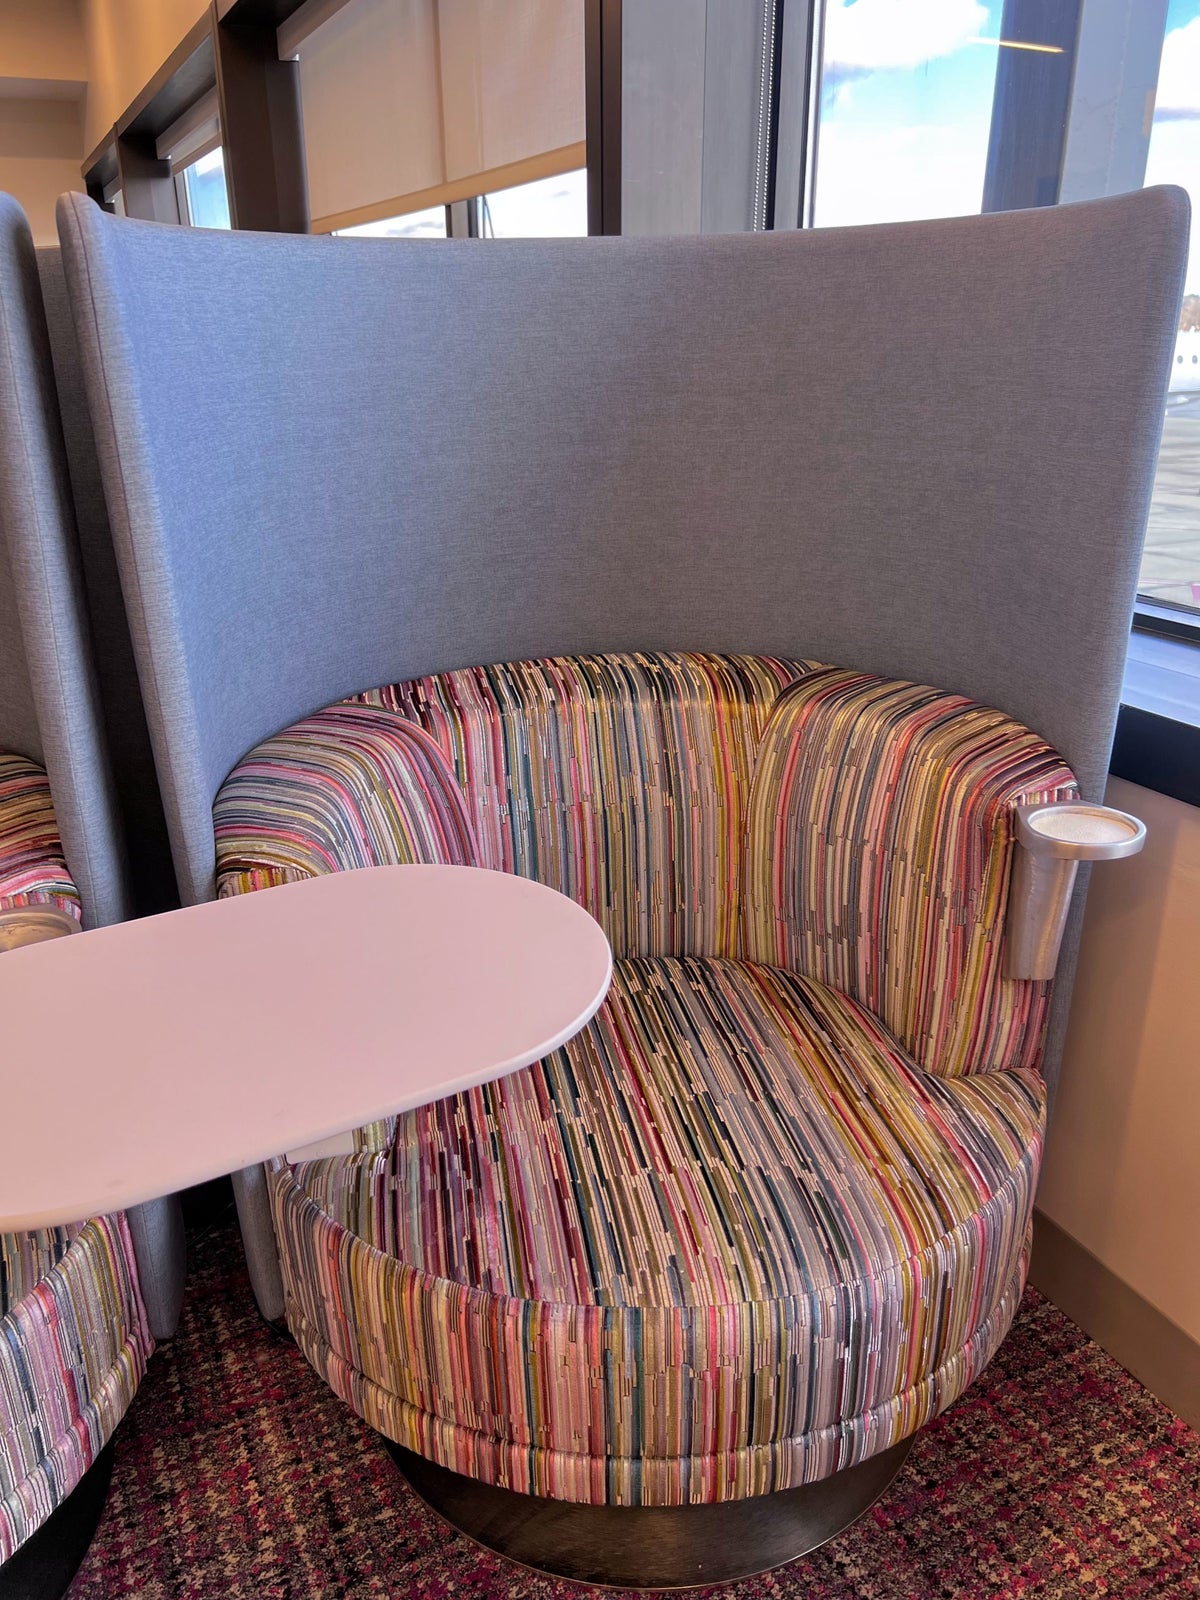 Unique seating at the Columbus airport lounge